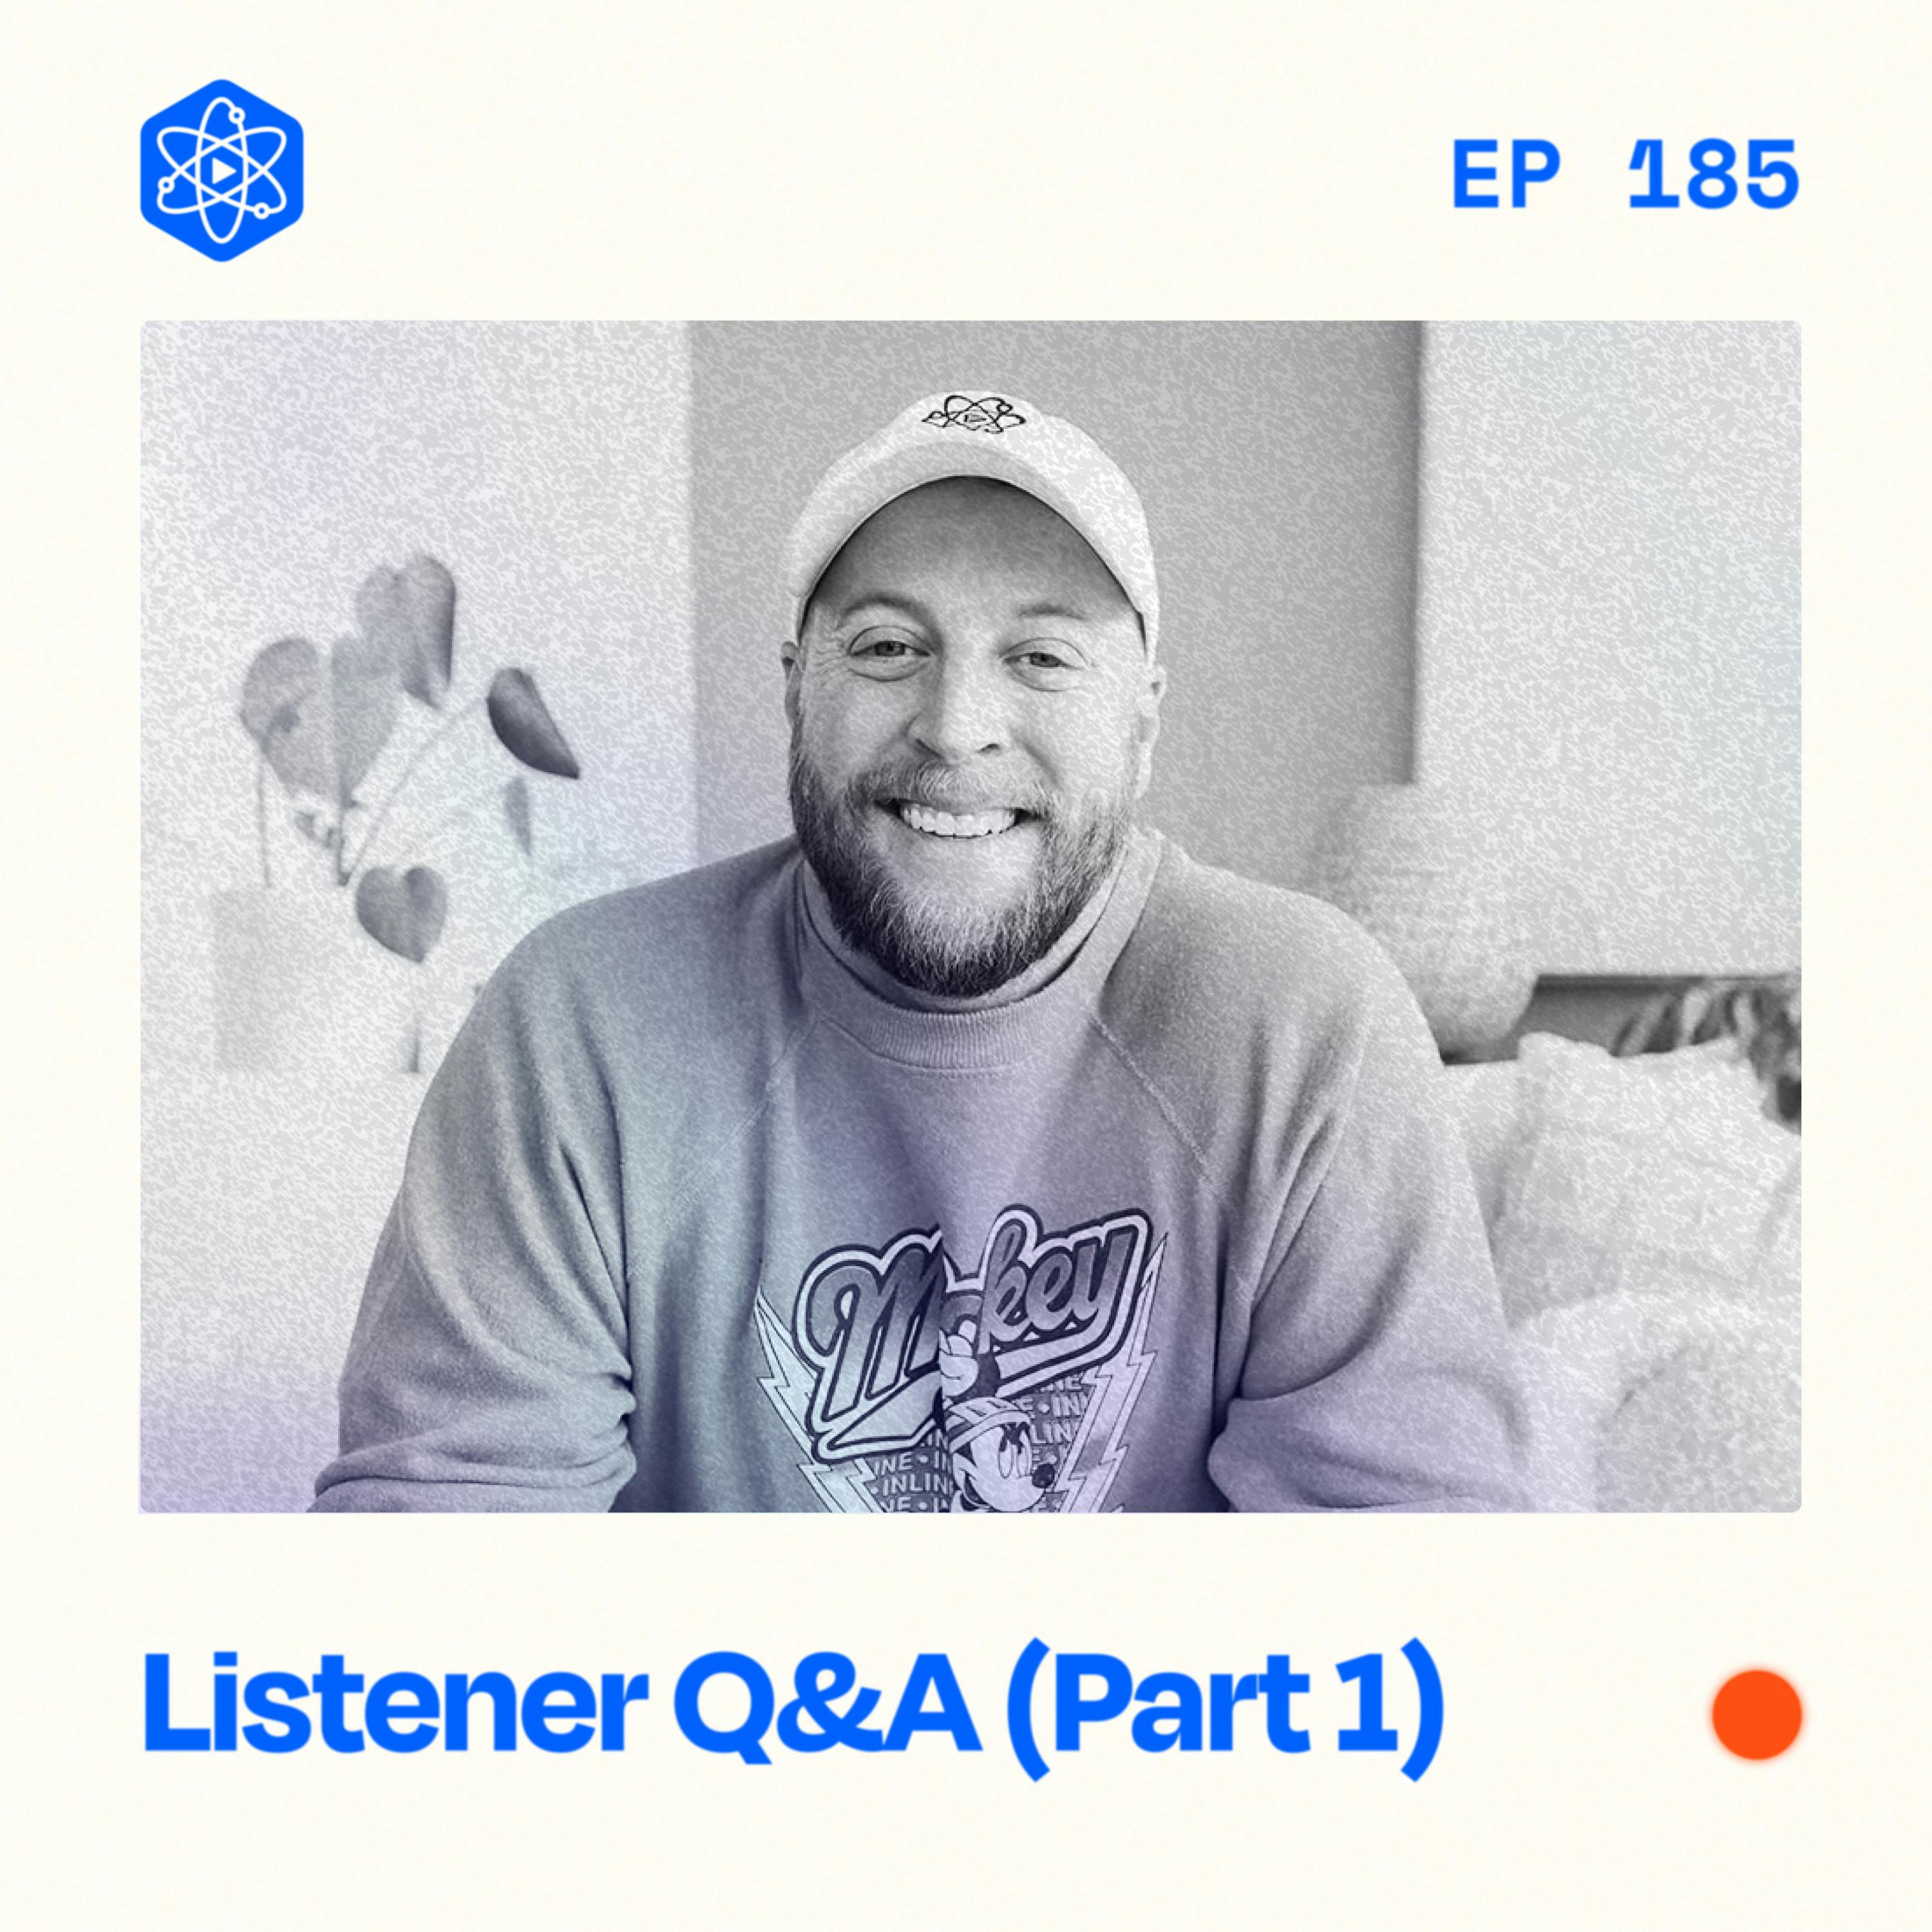 #185: Listener Q&A (Part 1) – The downside of viral videos, publishing less edited content, how we prepare our episodes, and working with sponsors.